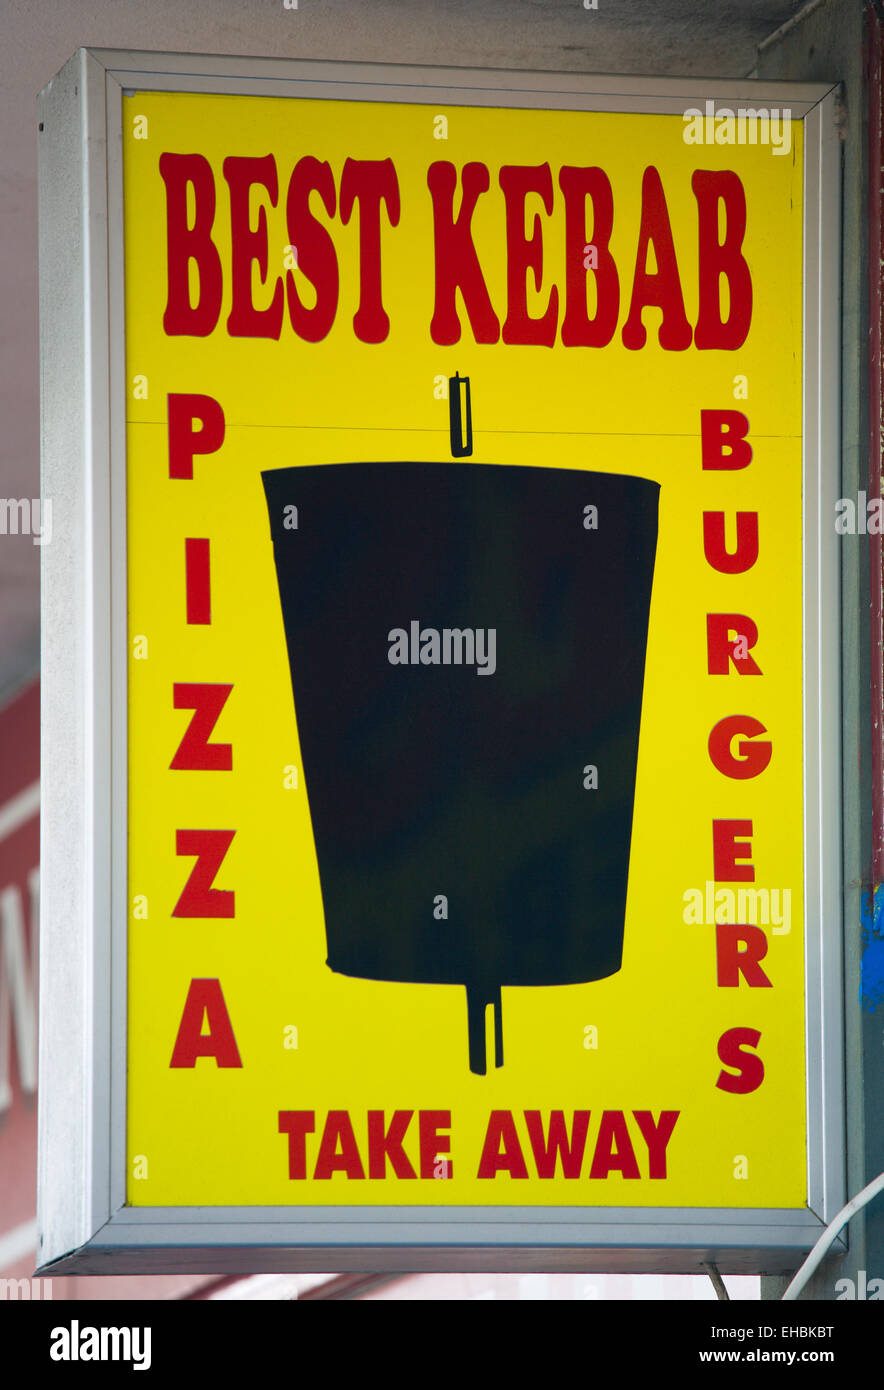 LED SHOP WINDOW HANGING NEON DISPLAY IDEAL FOR SHOP WINDOWS. PIZZA KEBAB 